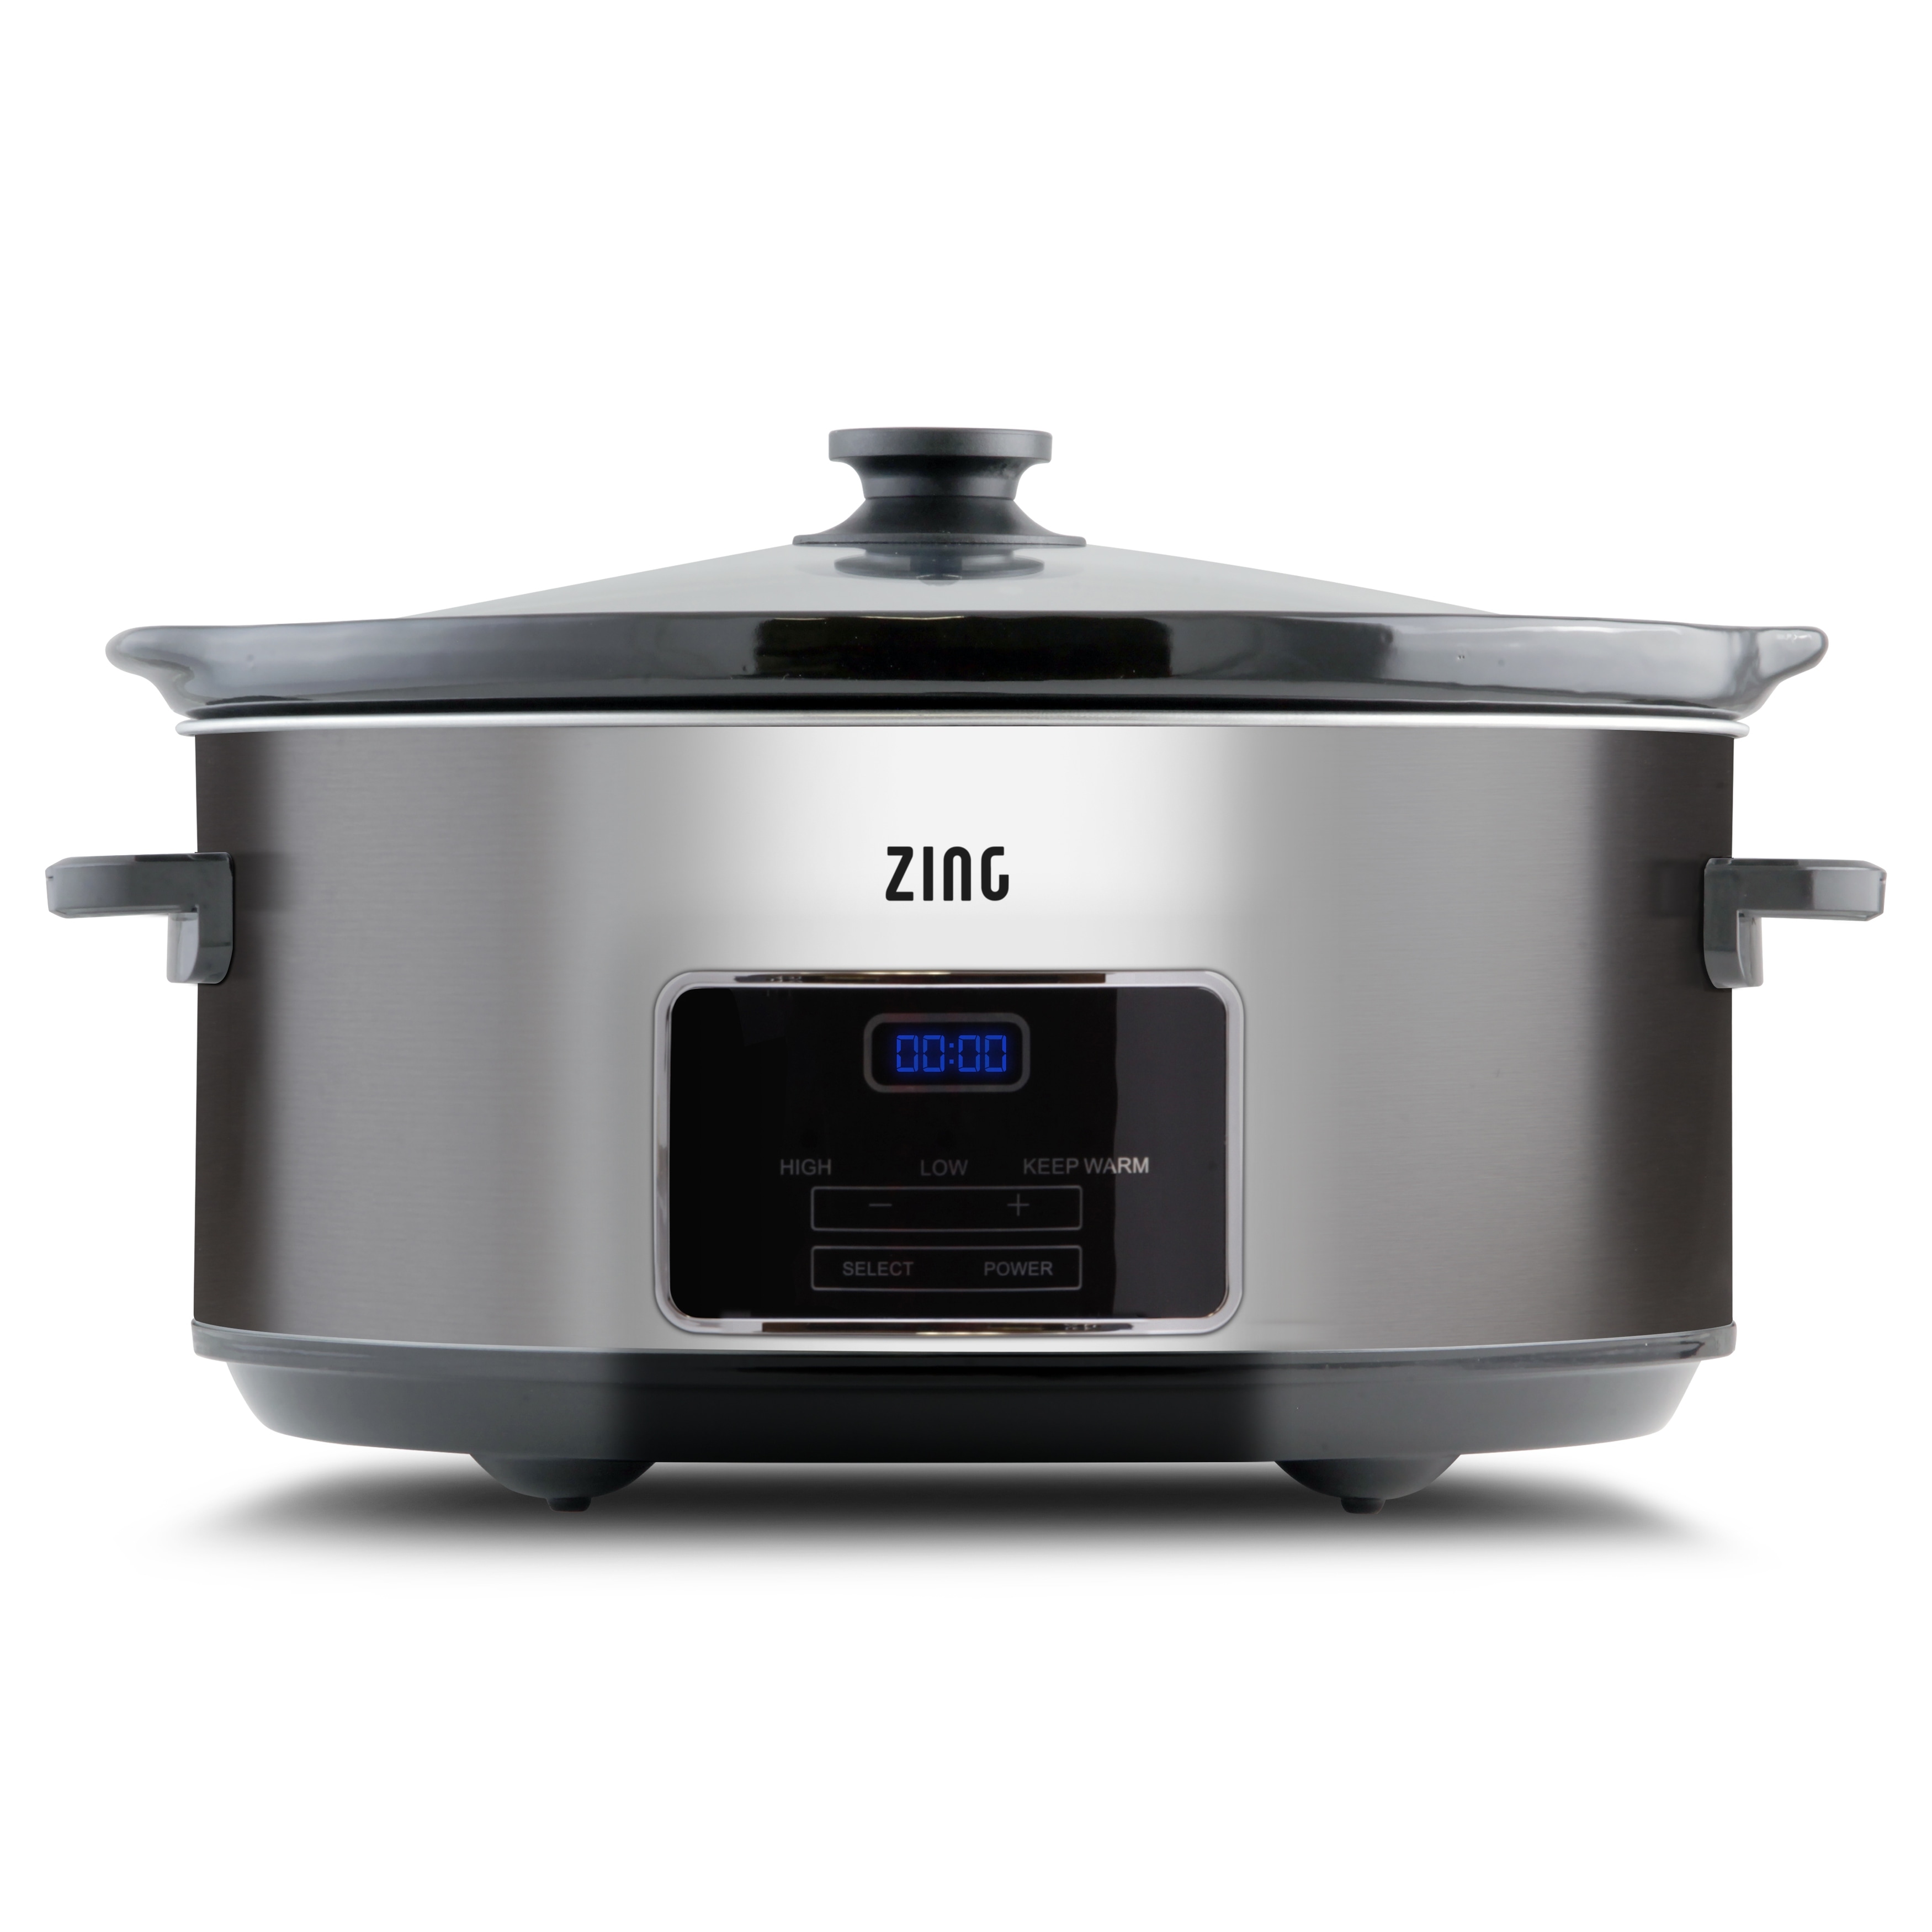 https://ak1.ostkcdn.com/images/products/is/images/direct/bbd3f8d44aae45cf0e3542f296c5a5a57e858c1e/Zing-6-Quart-Digital-Programmable-Slow-Cooker.jpg